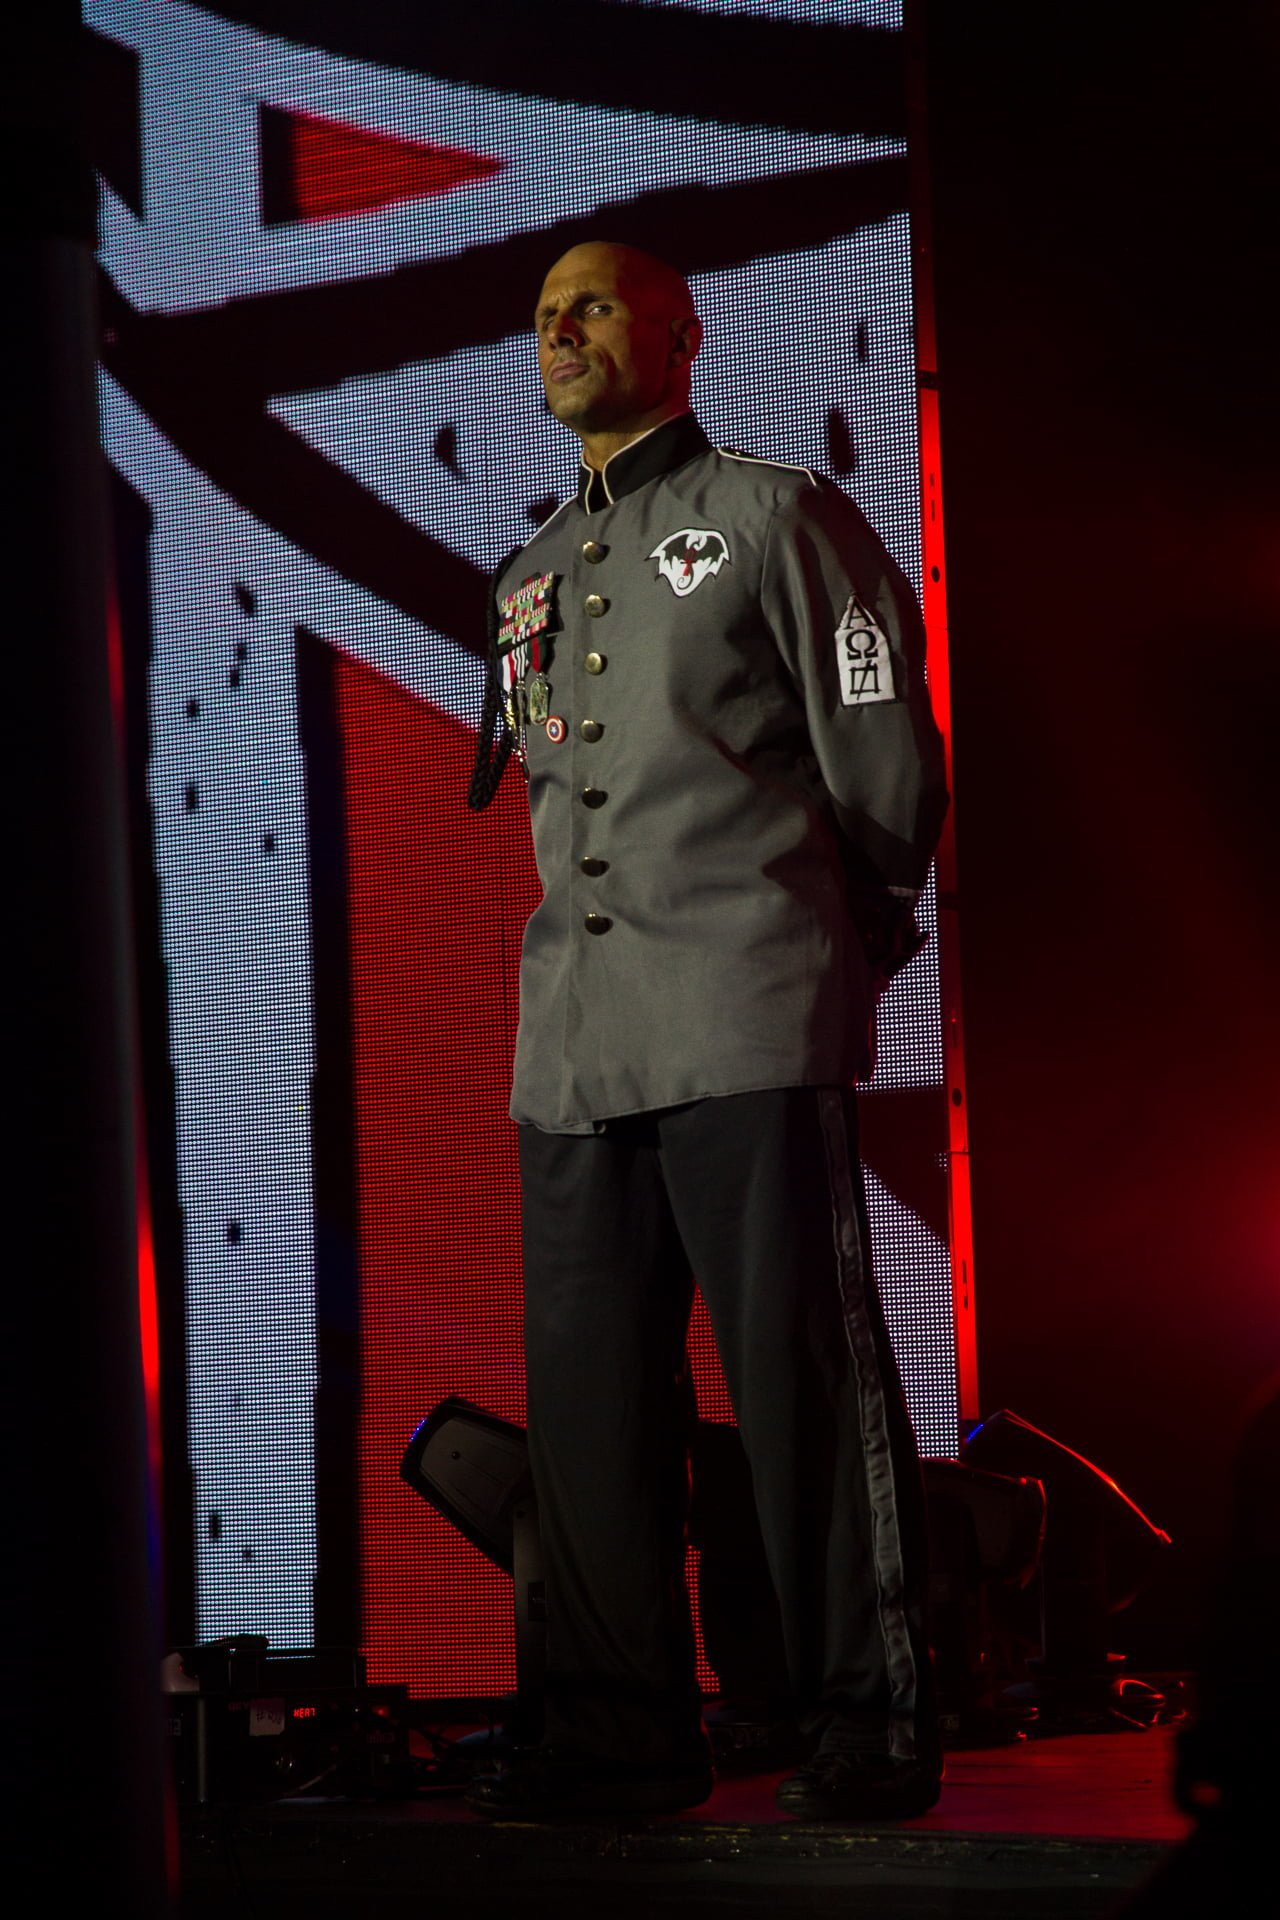 Christopher Daniels 24 Photo Credit RING OF HONOR